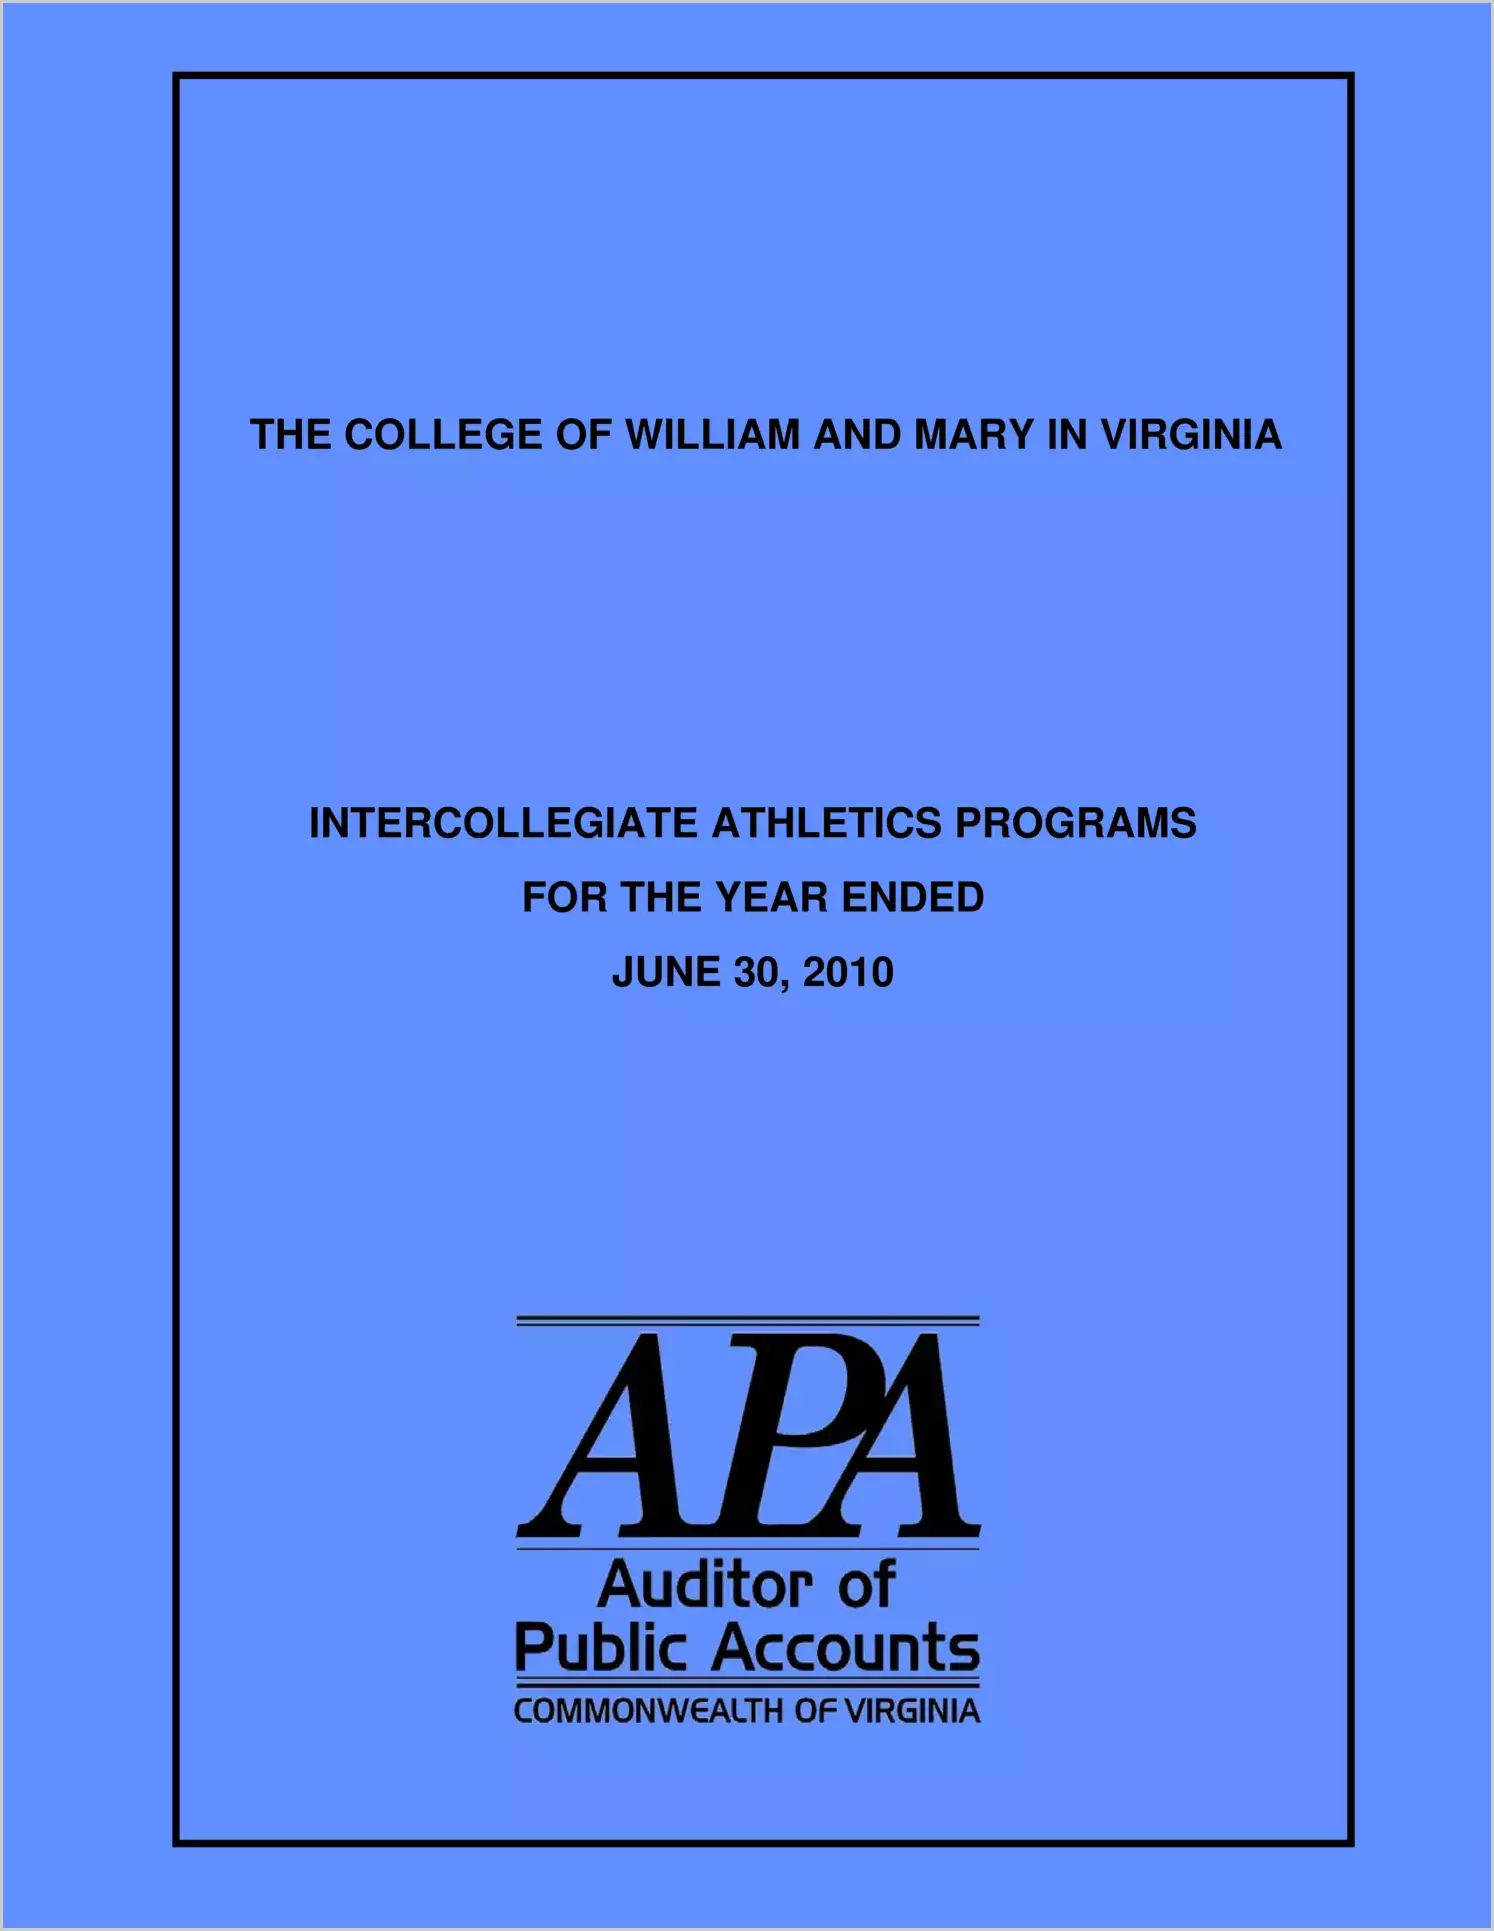 The College of William and Mary in Virginia Intercollegiate Athletics Programs for the year ended June 30, 2010